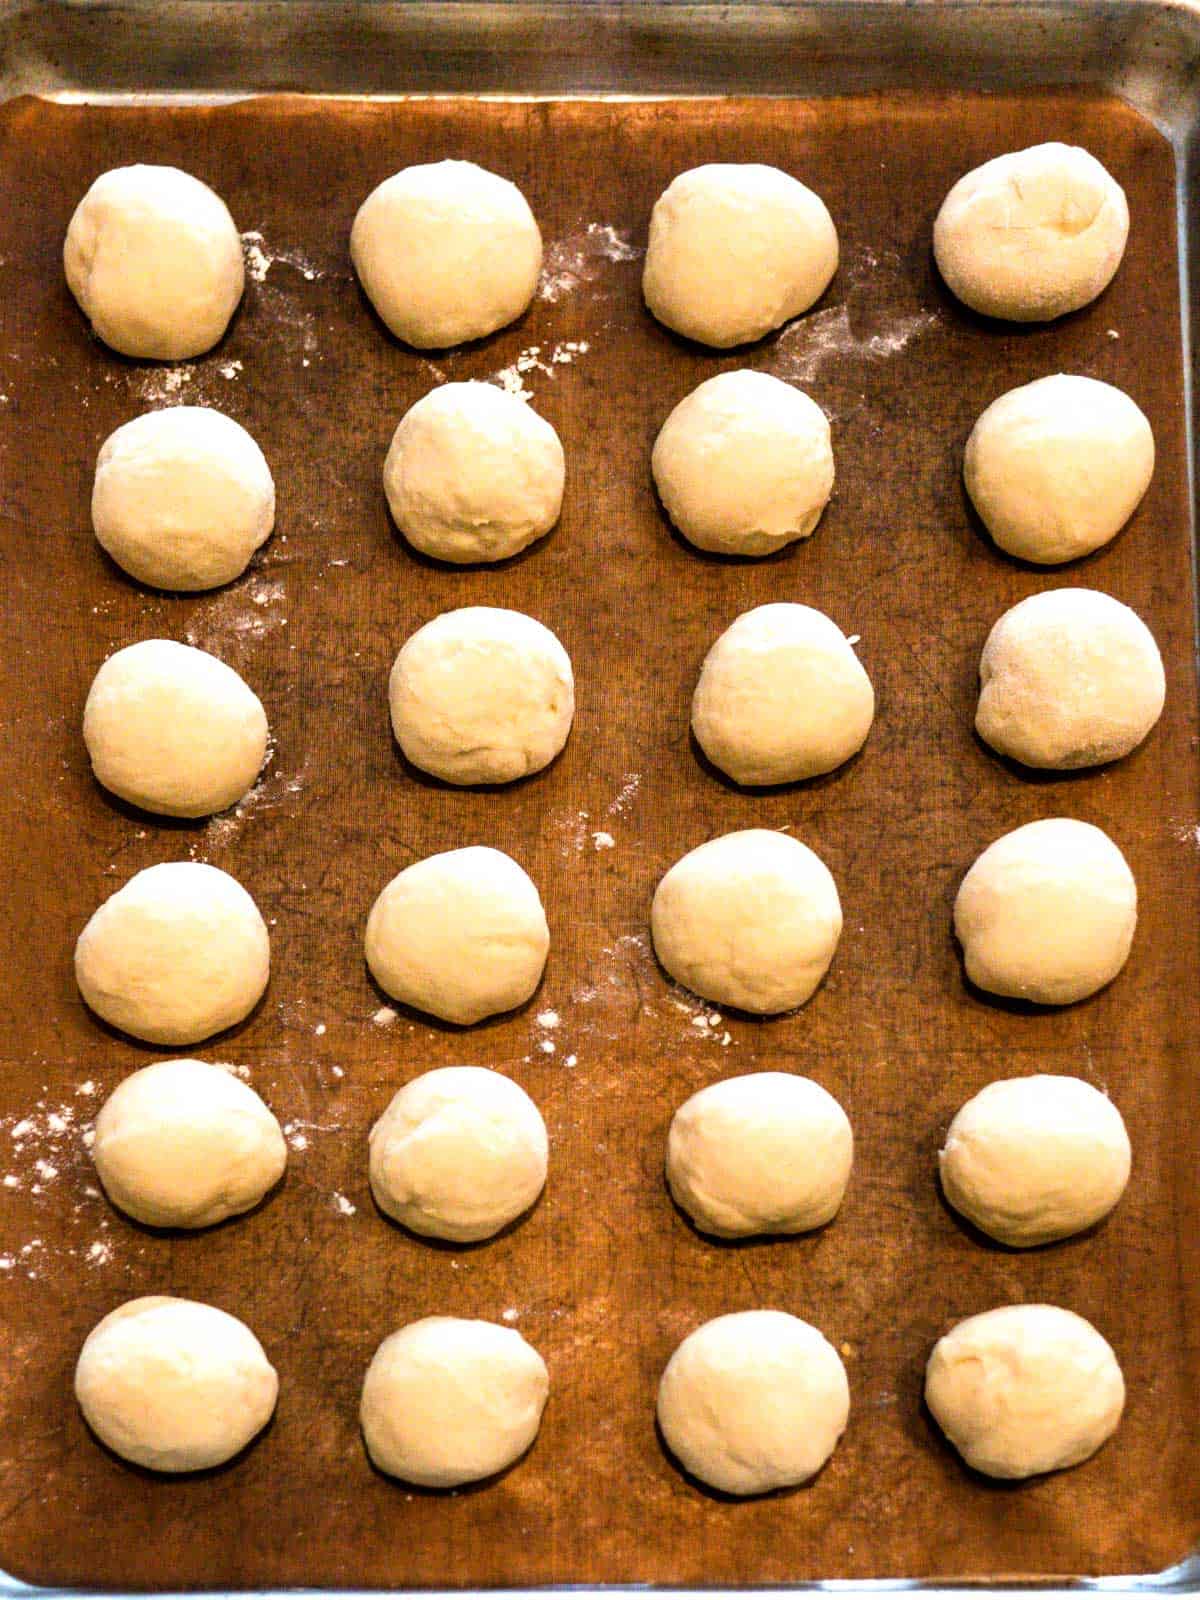 Dough balls on parchment lined baking sheet ready to rise.